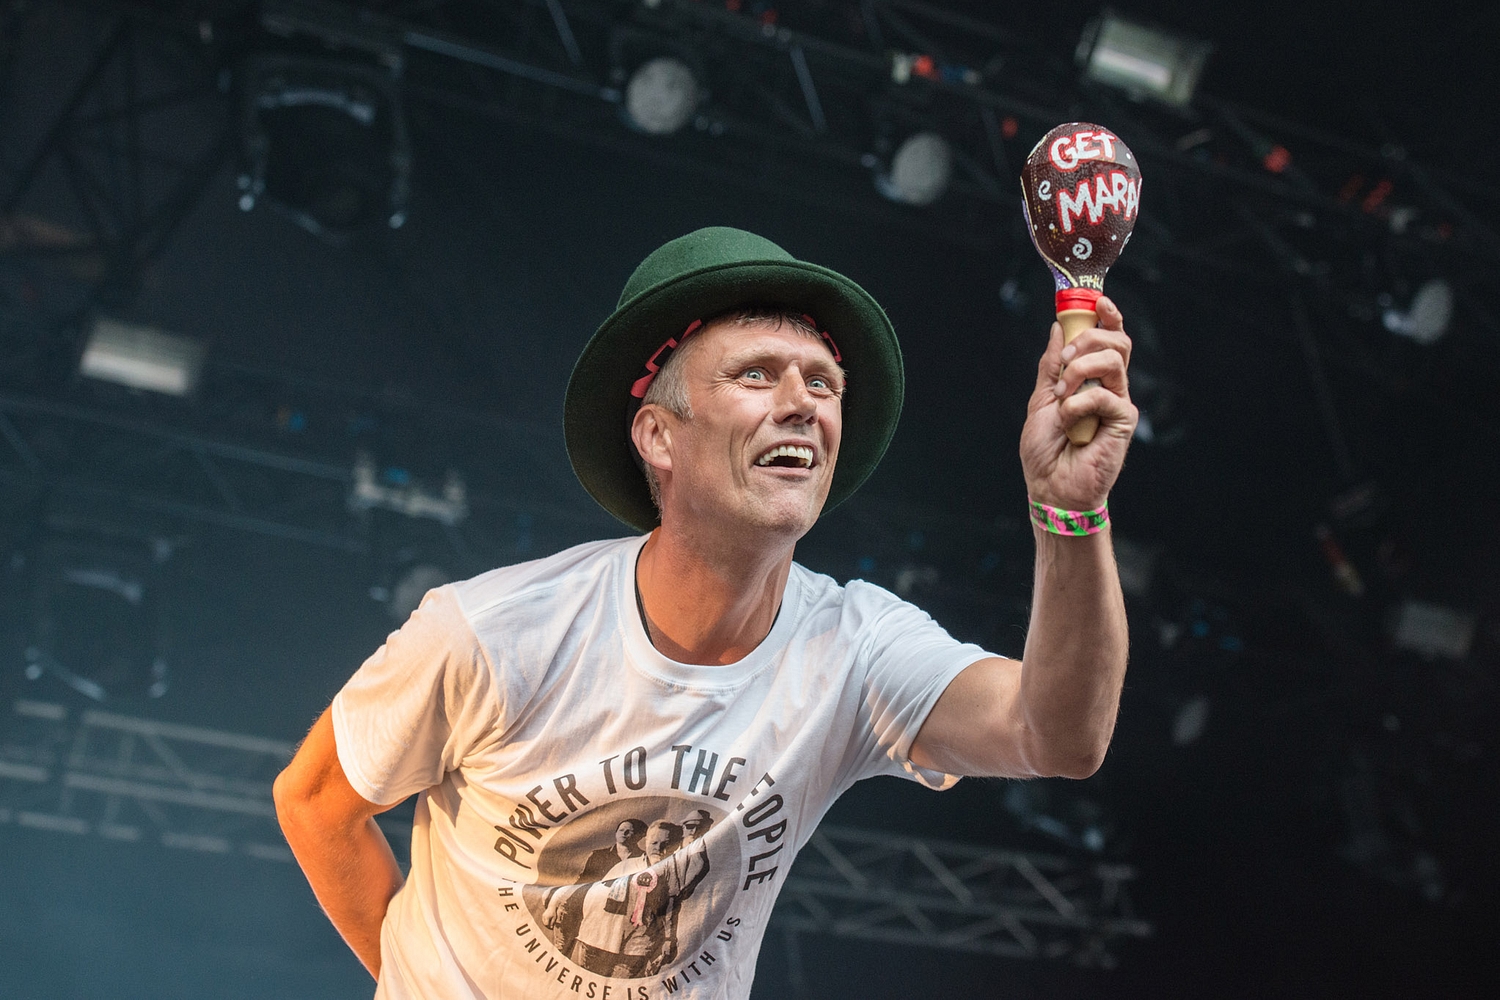 Bez has successfully registered to stand in the UK general election